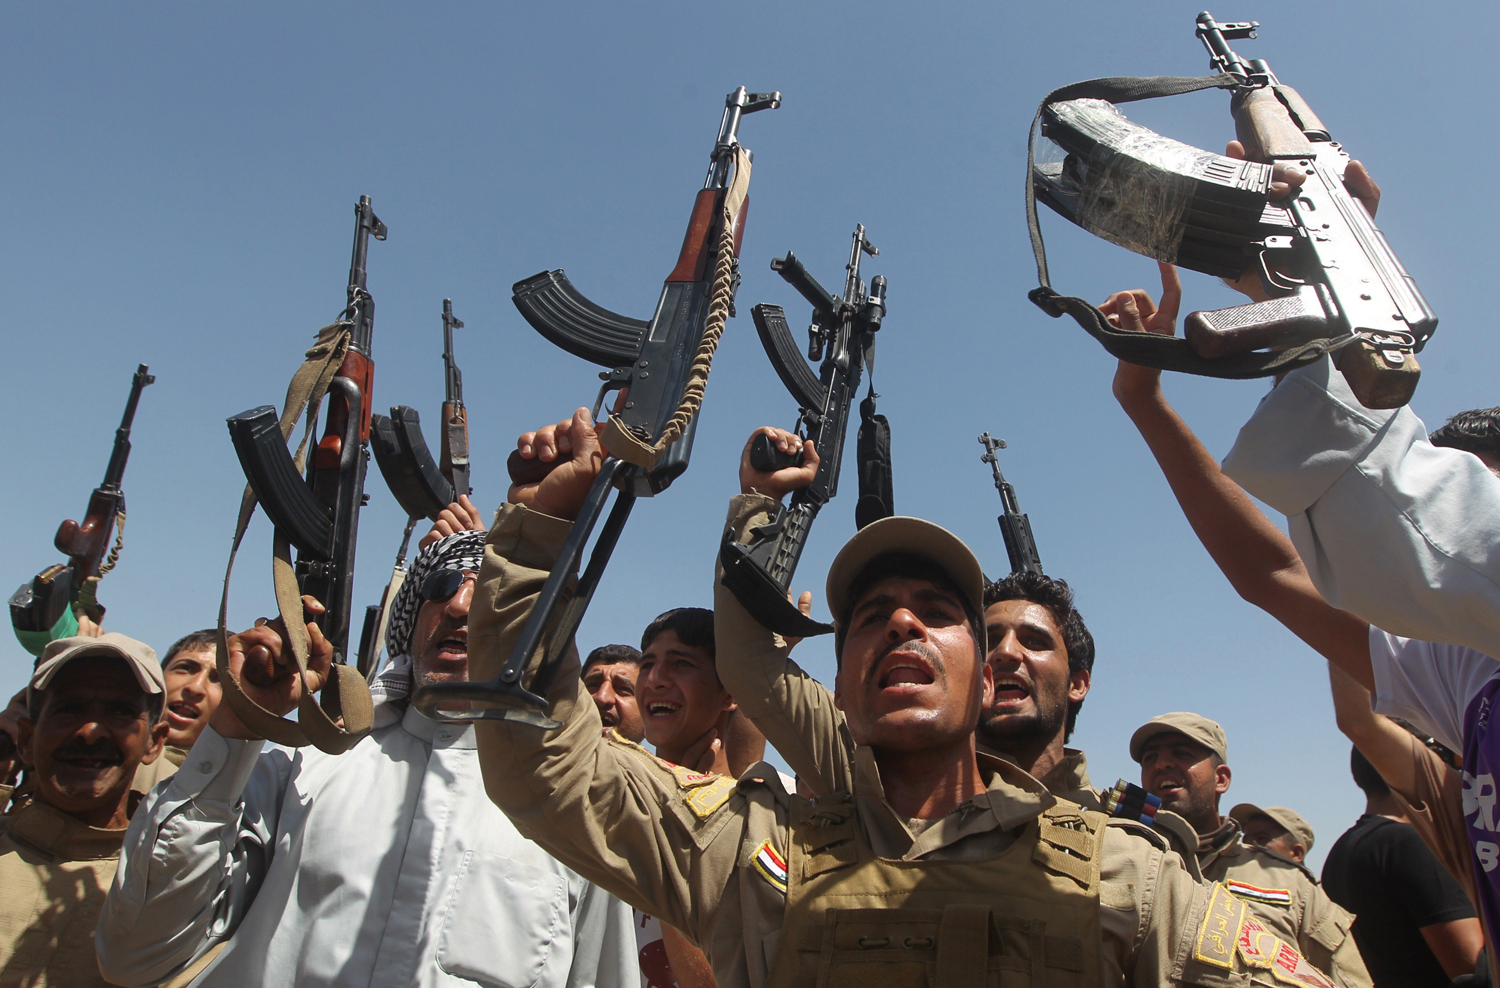 Iraqi Shiite men, some of them wearing military fatigues and guns given by the government, raise their weapons as they gather in the Iraqi town of Jdaideh in the Diyala province on June 14, to show their support for the call to arms by Shiite cleric Grand Ayatollah Ali al-Sistani.